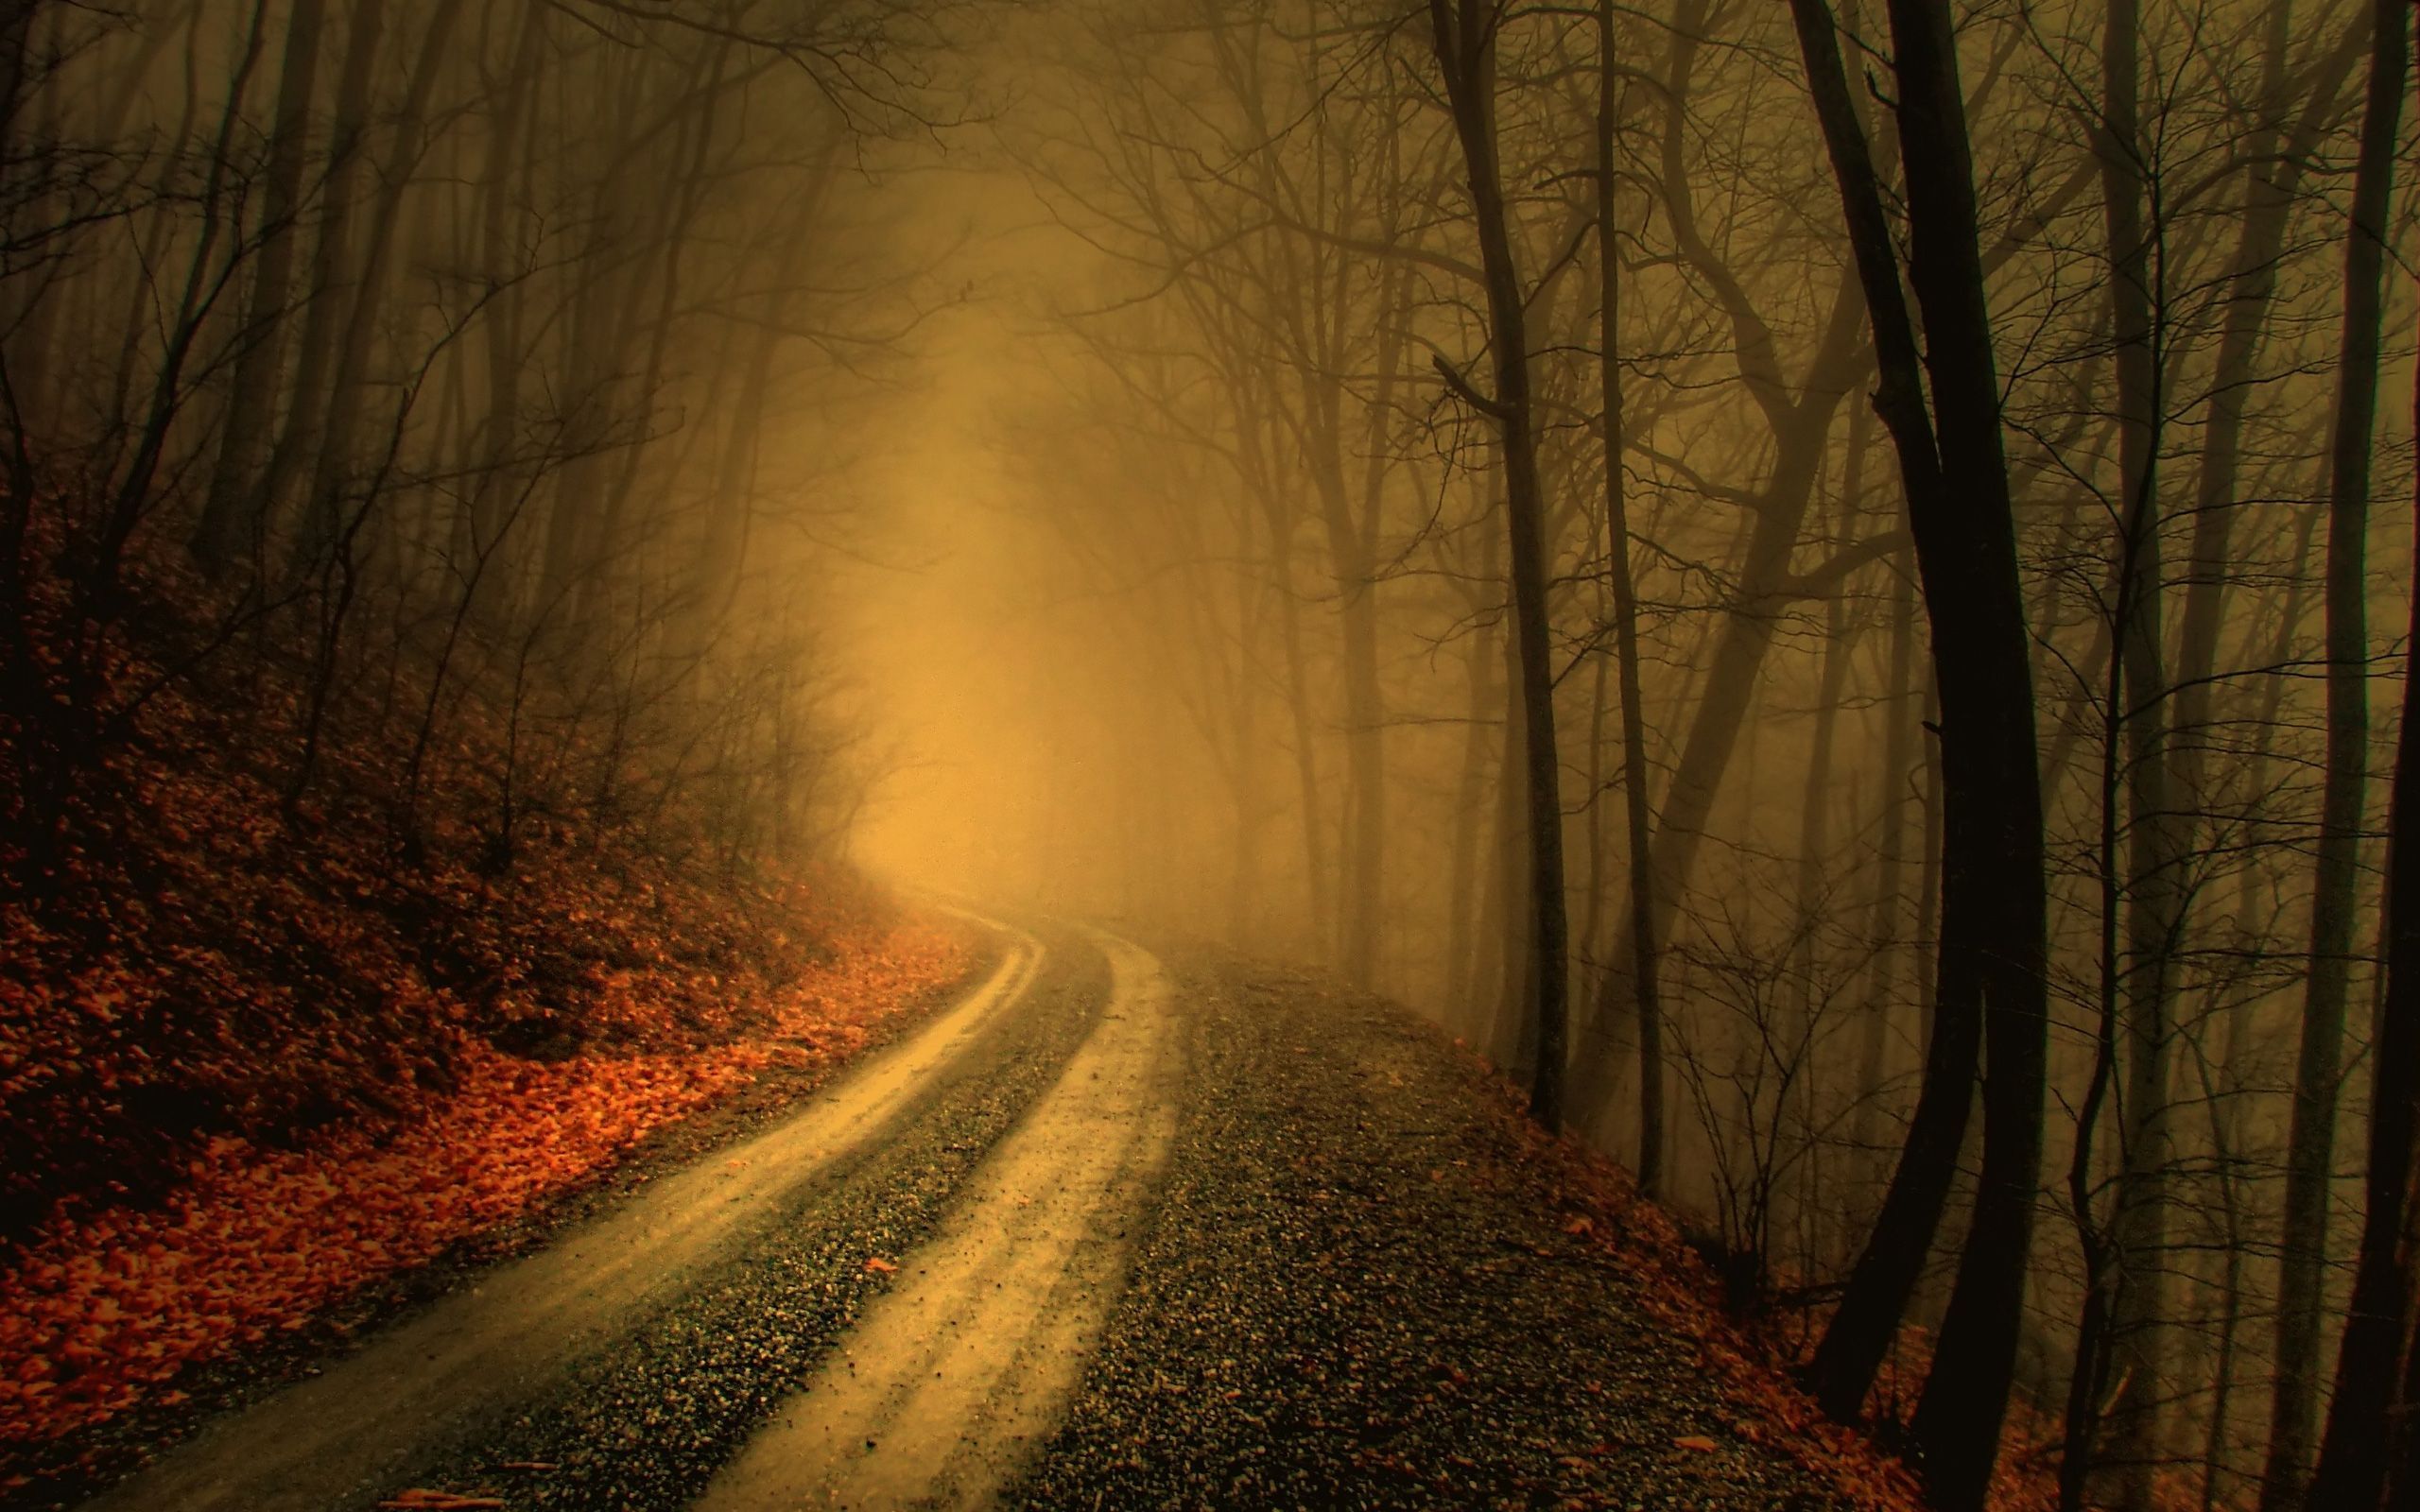 Autumn fog forests mist paths wallpaper - Quality